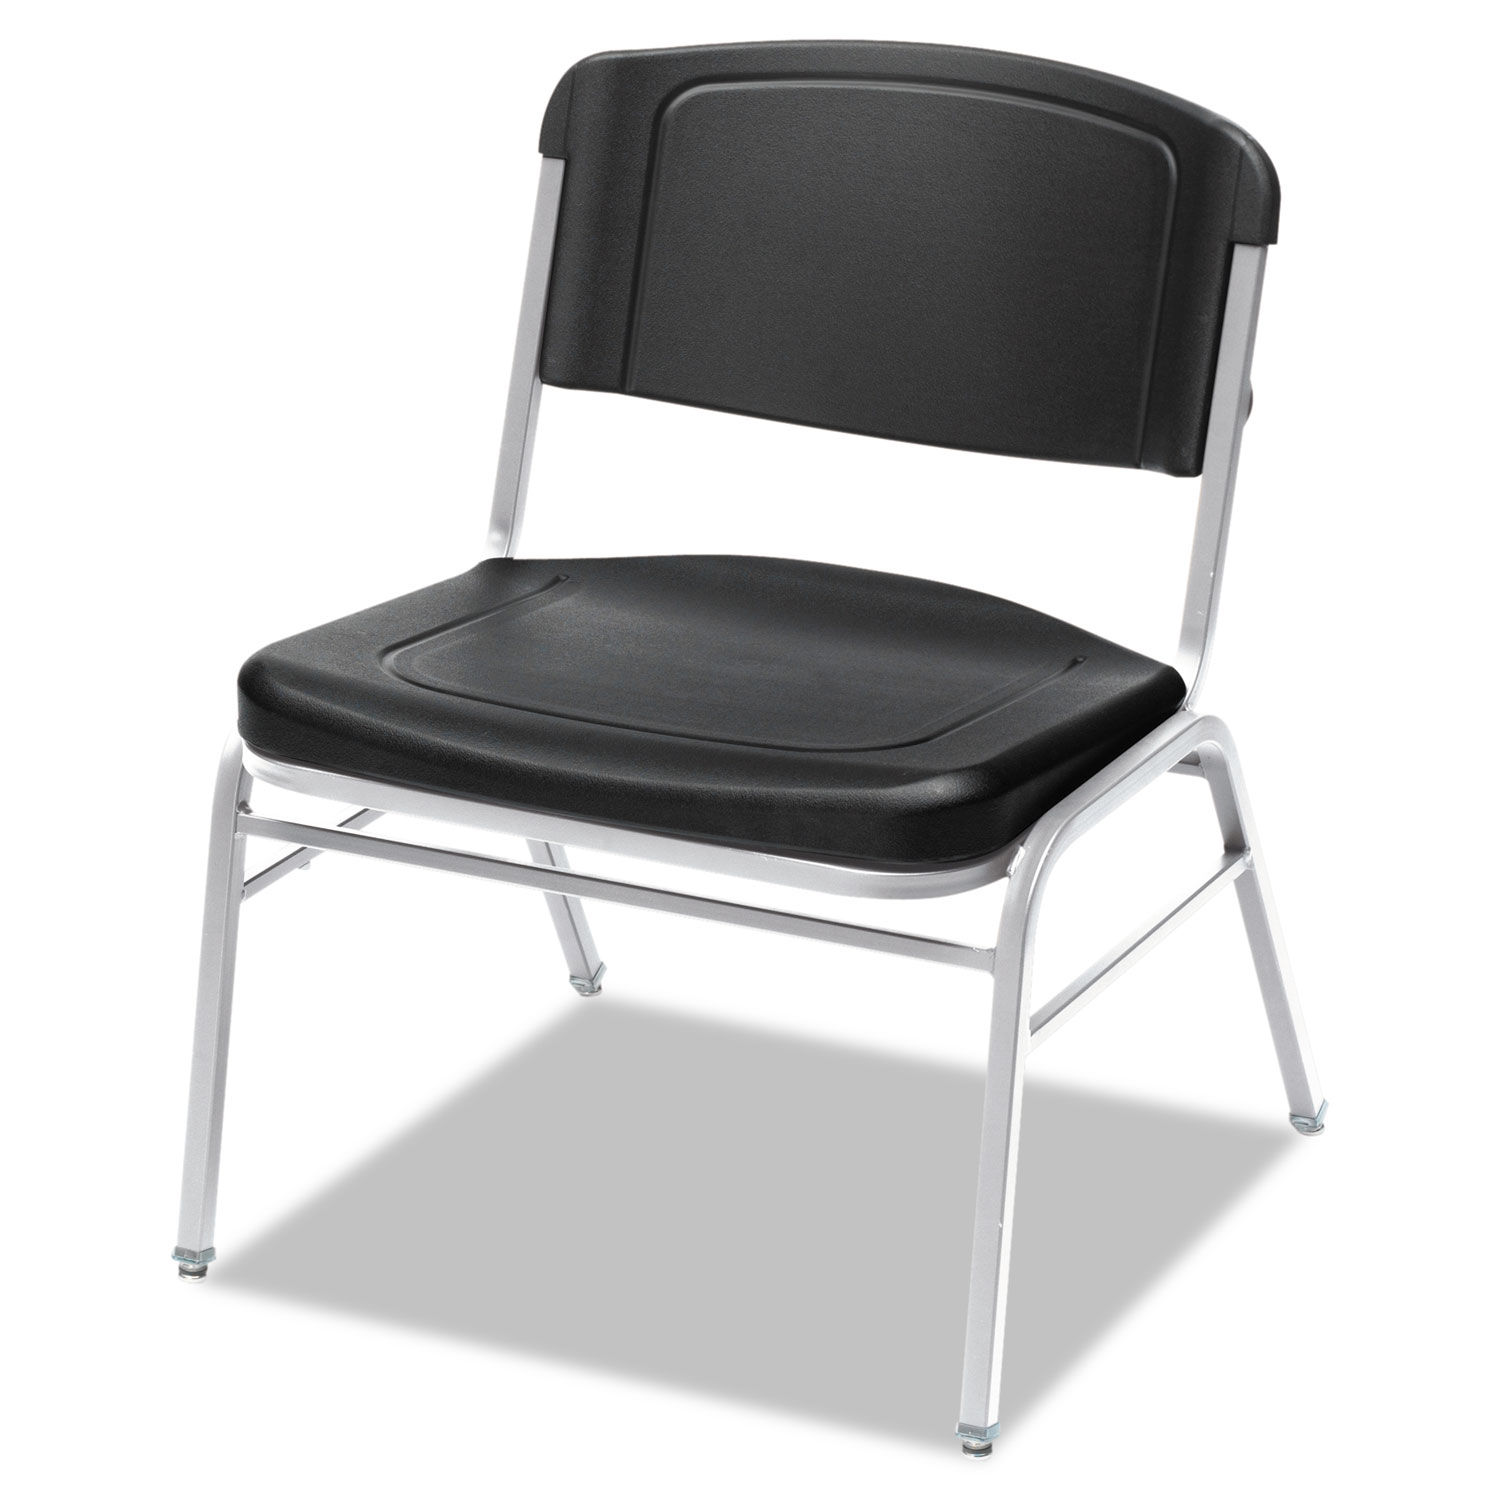 Rough n Ready Wide-Format Big and Tall Stack Chair Supports 500lb, 18.5" Seat Height, Black Seat/Back, Silver Base, 4/Carton